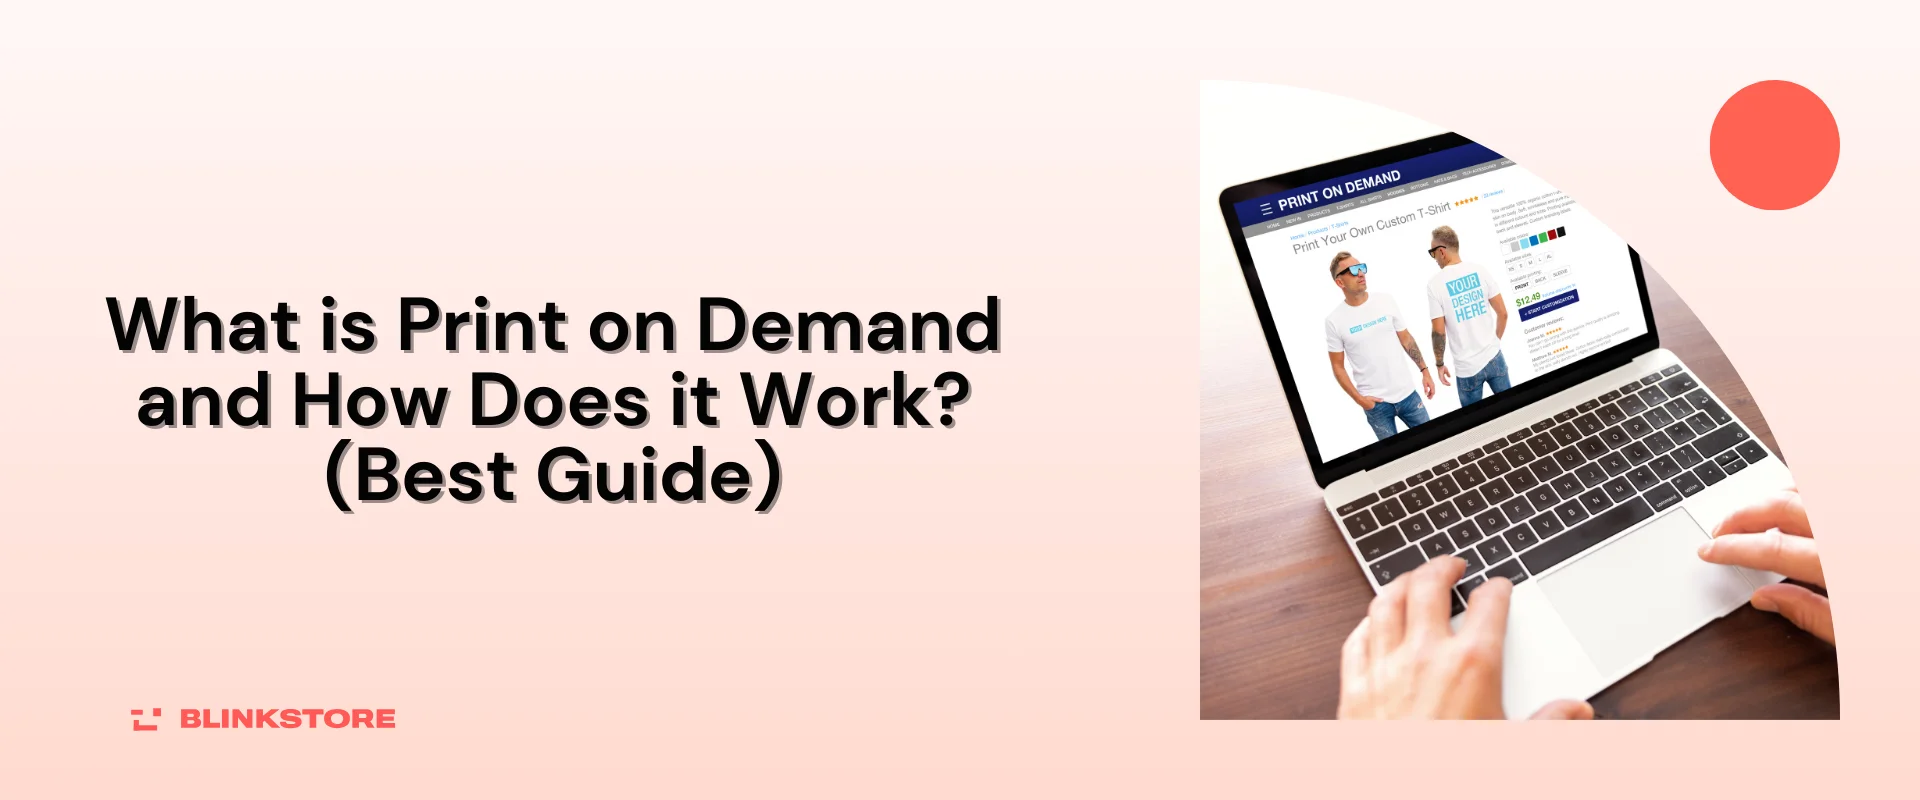 What is Print on Demand and How Does it Work? (Best Guide)